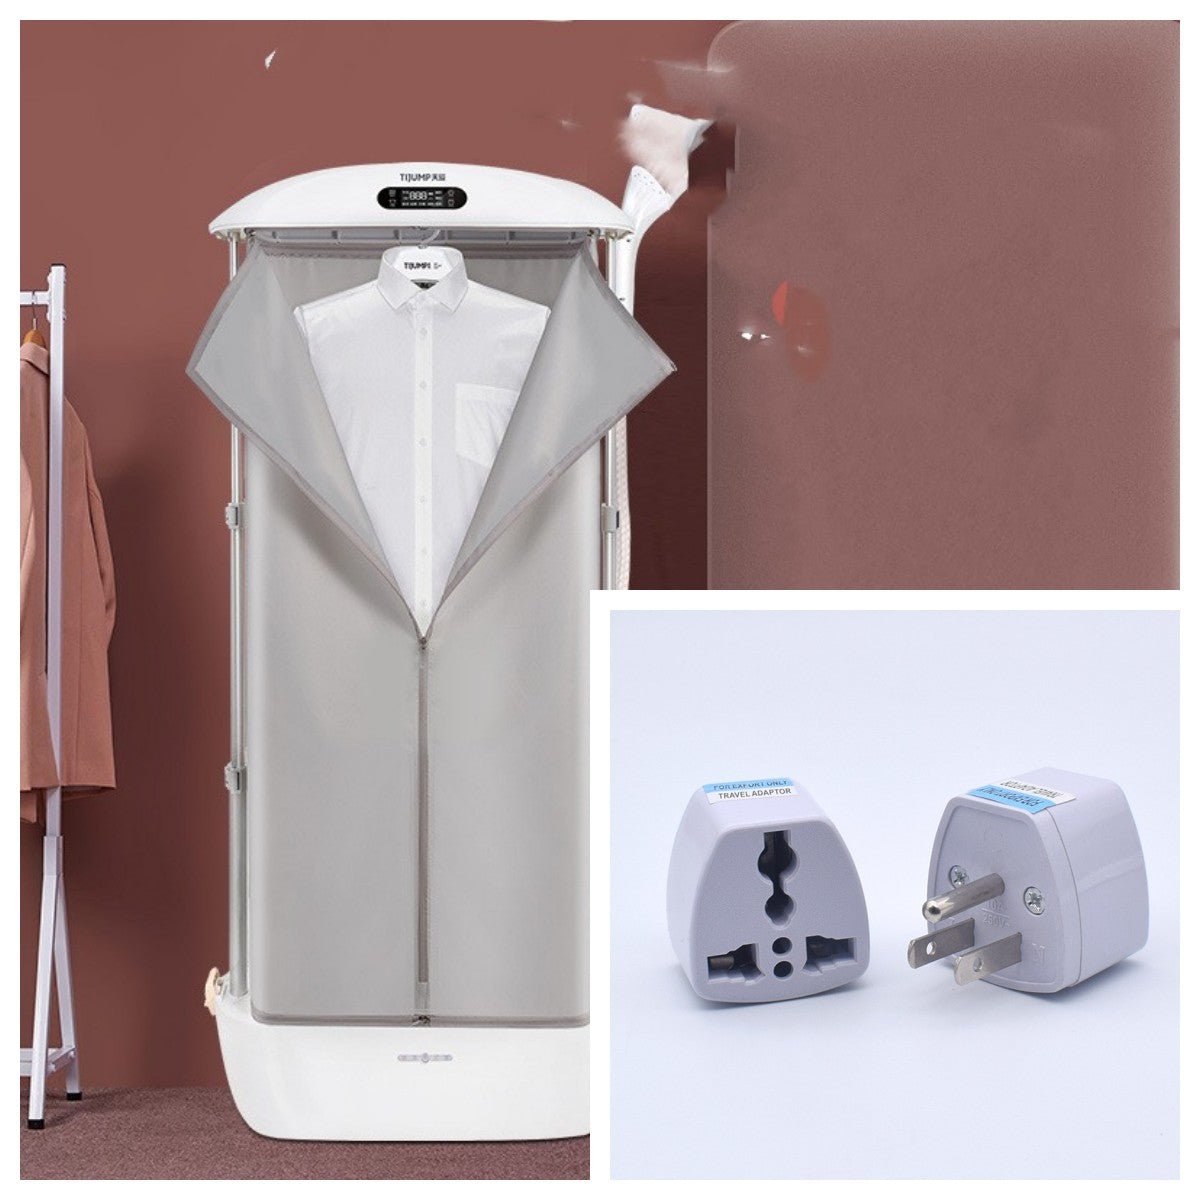 Disinfection Clothes Drying Folding Dryer - Clothes Dryers -  Trend Goods